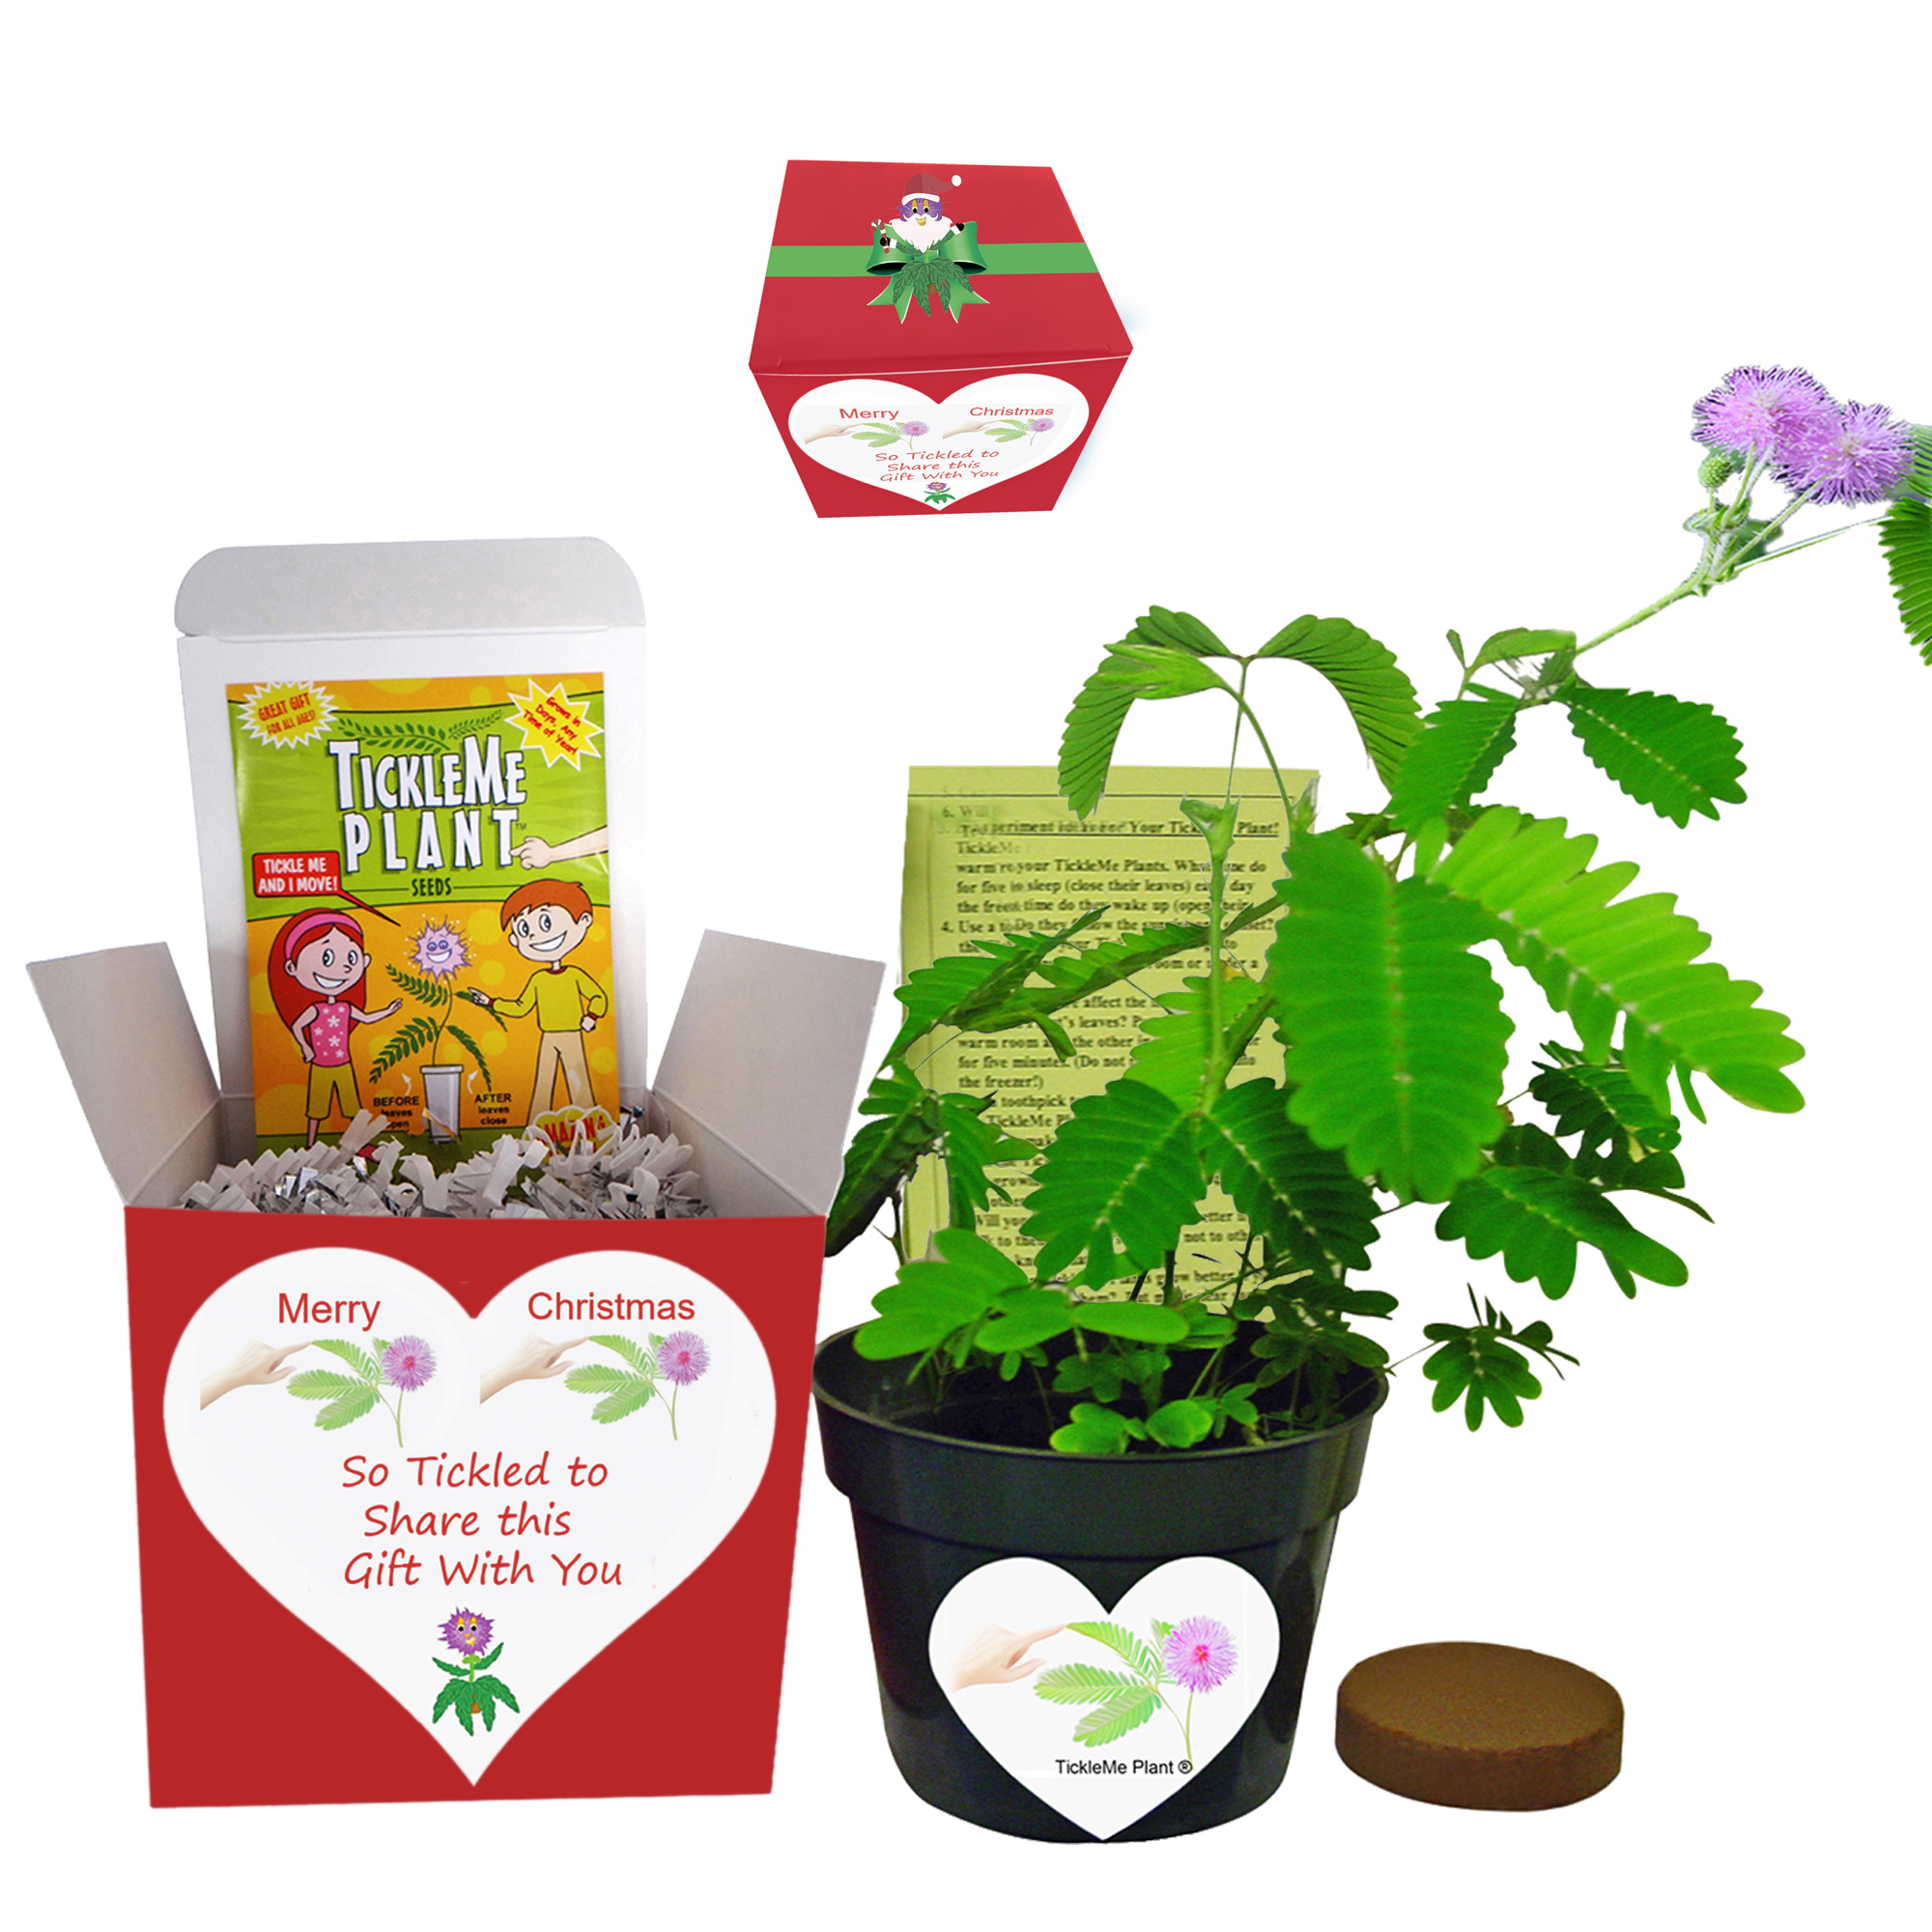 TickleMe Plant Box Set - Grow The Christmas House Plant That Closes Its Leaves When Tickled